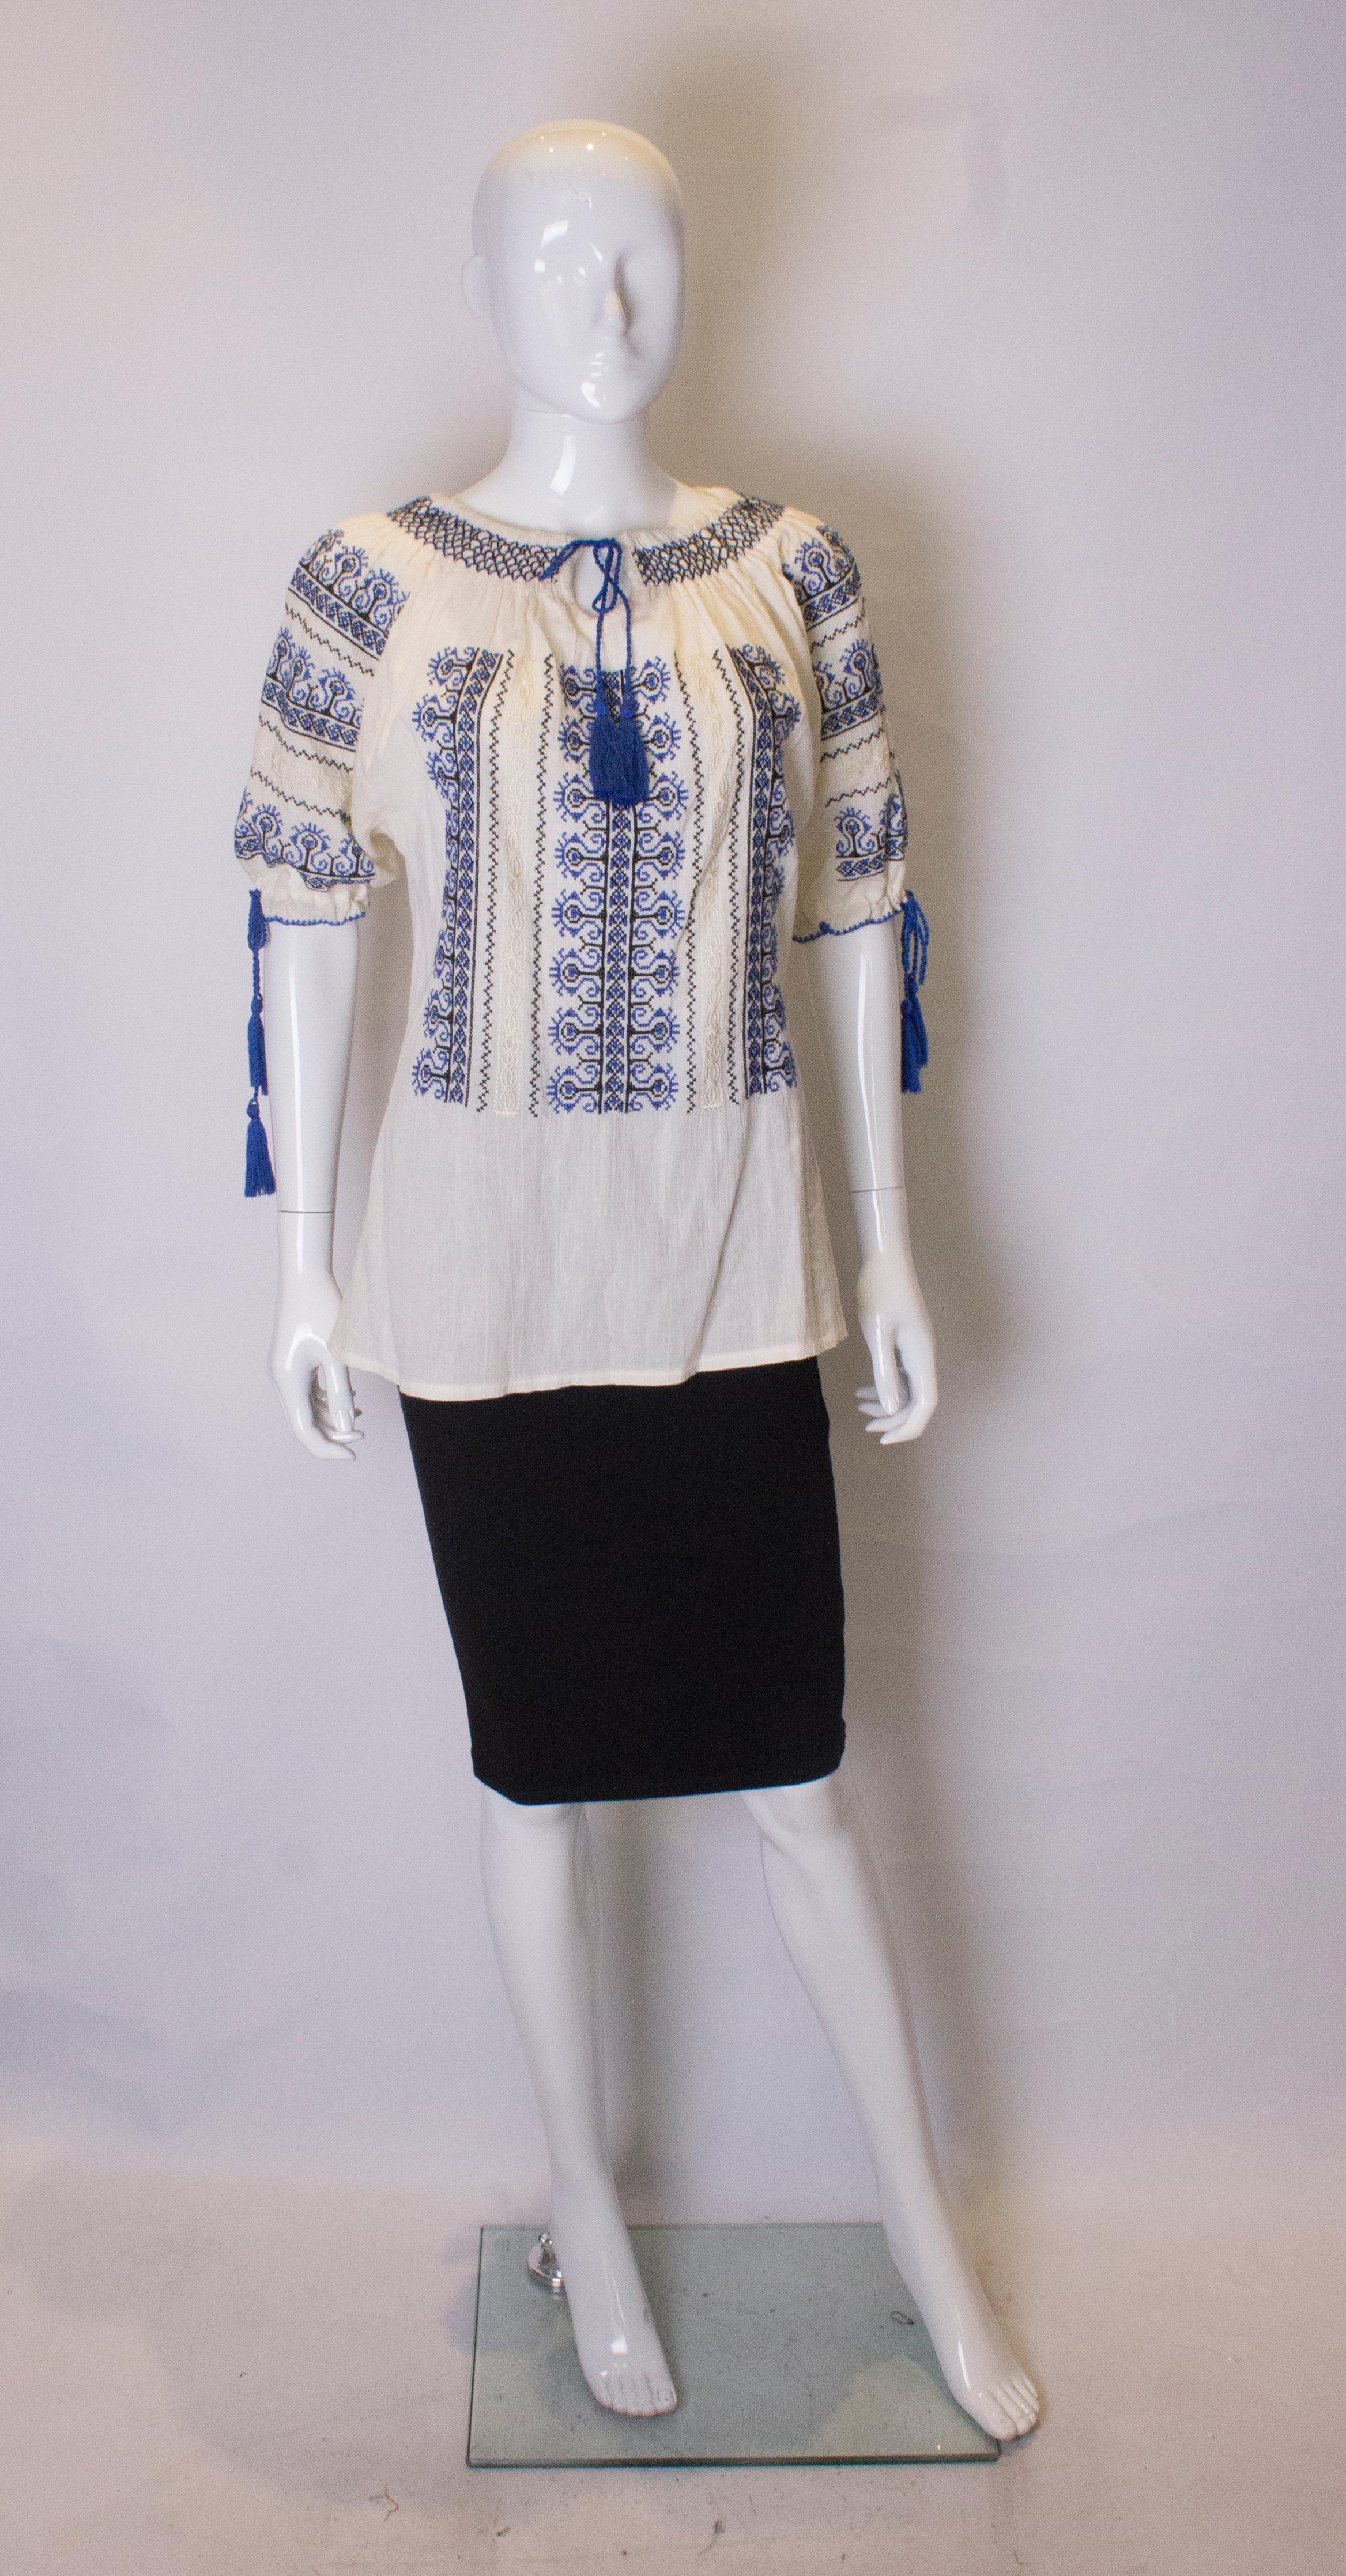 A fun and easy to wear top for Spring /Summer. In an ivory cheesecloth  with blue and black embroidery, the top has a tie neckline and sleeves.